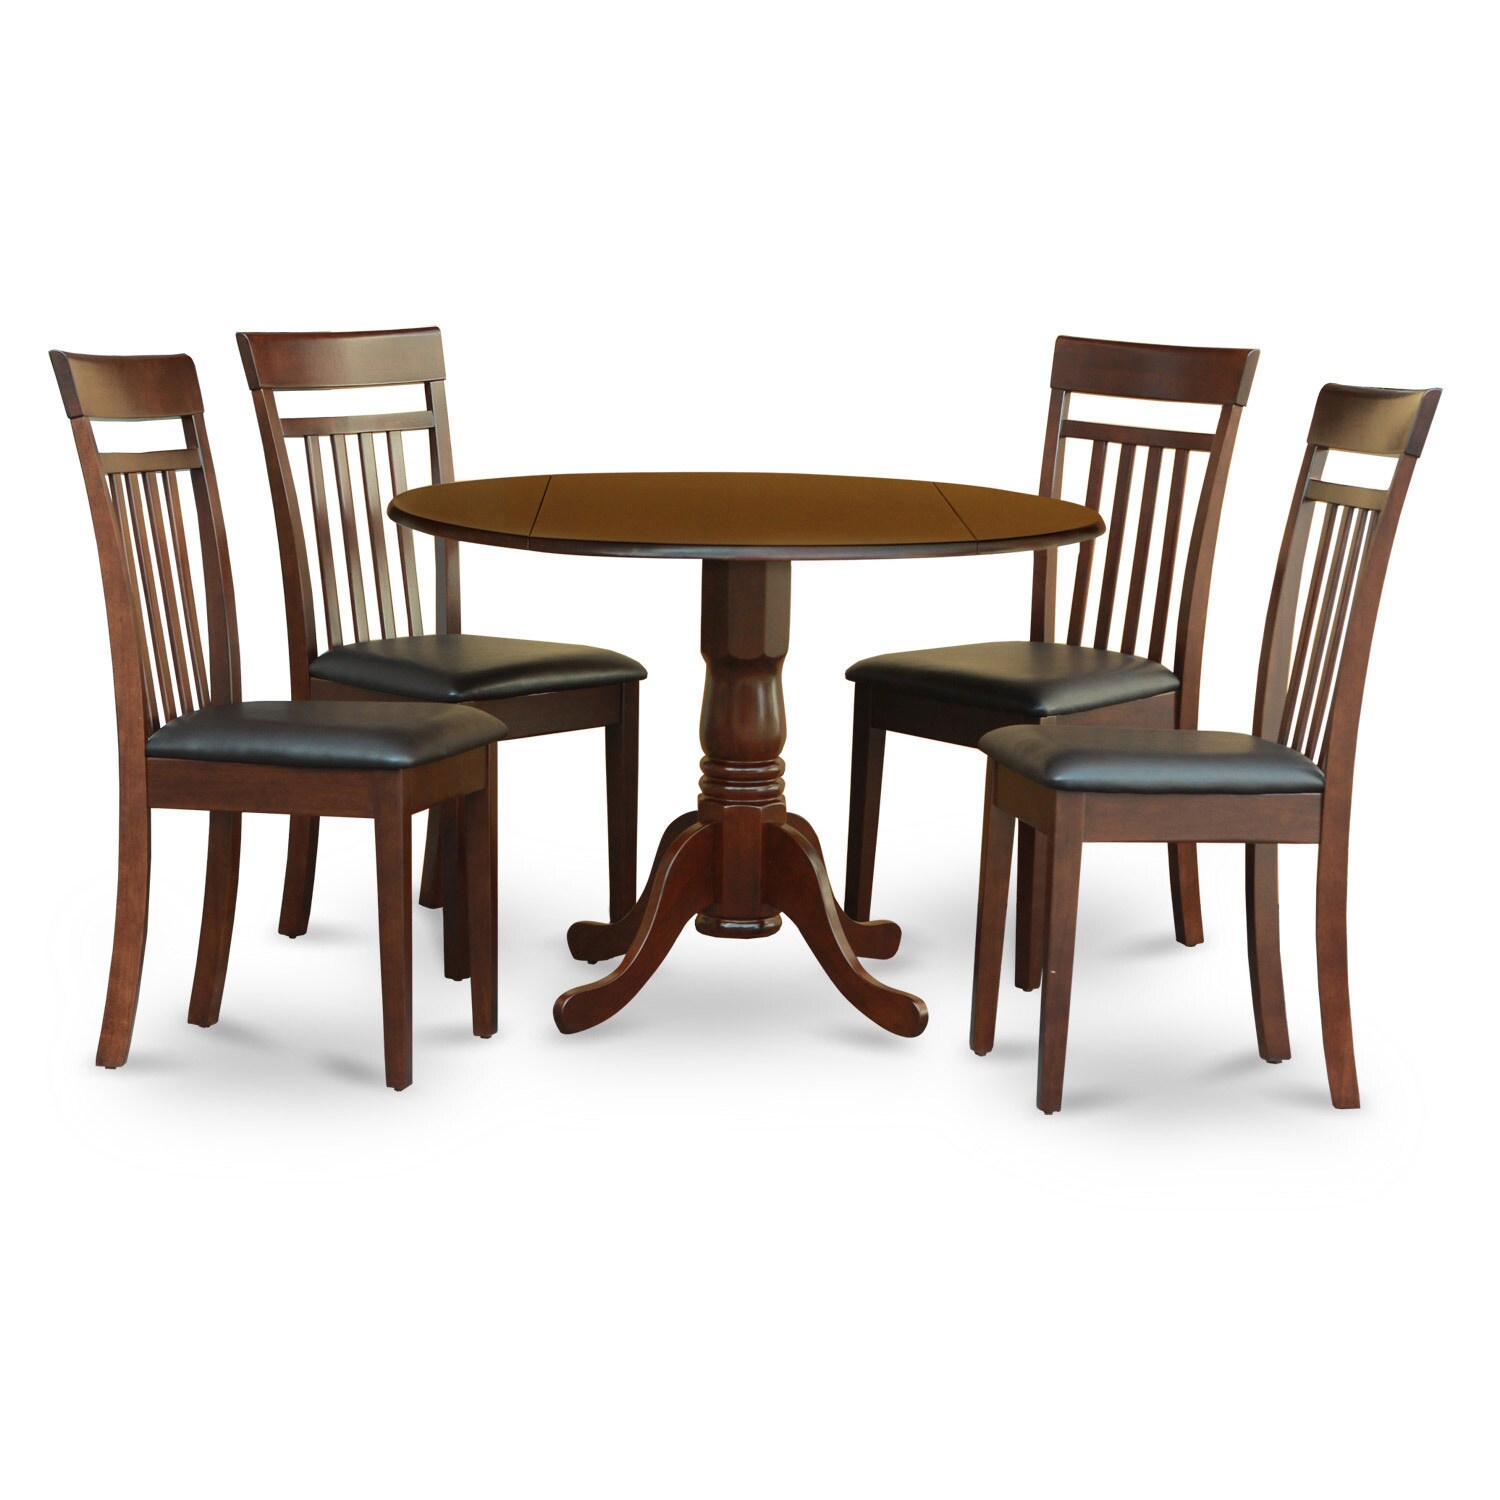 Shop Mahogany Small Table Plus 4 Kitchen Chairs 5 Piece Dining Set